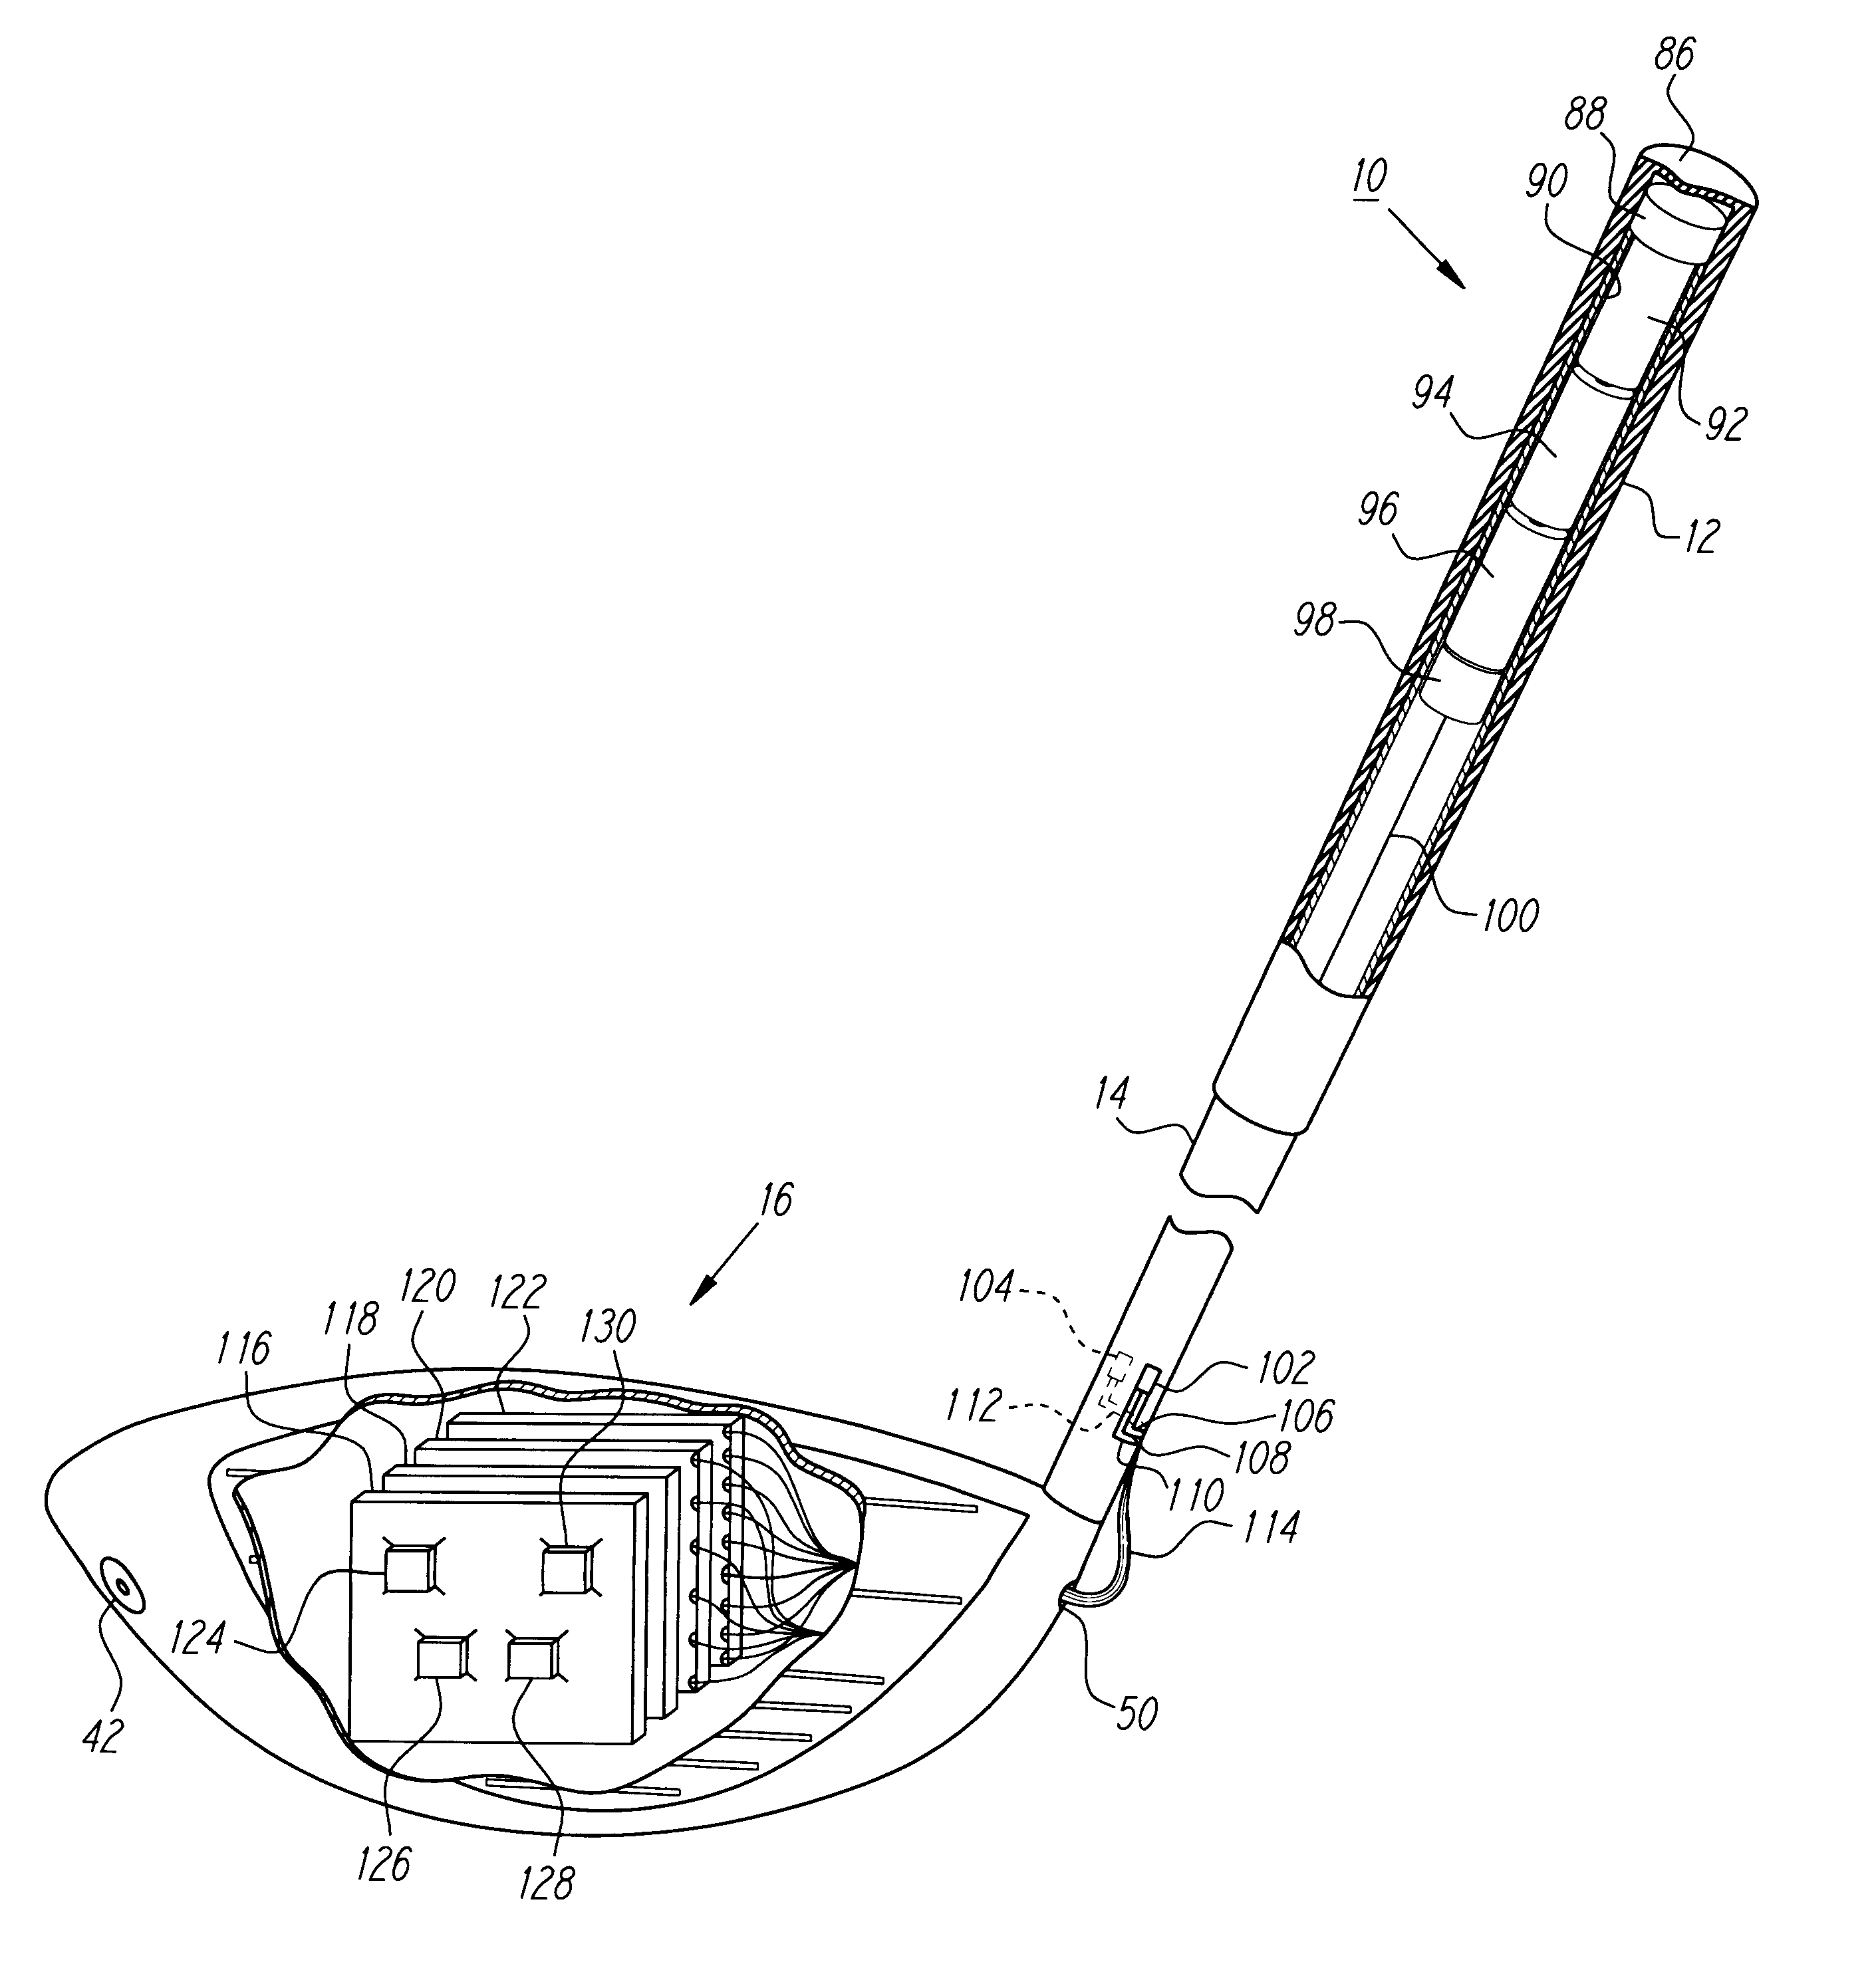 Instrumented golf club system and method of use